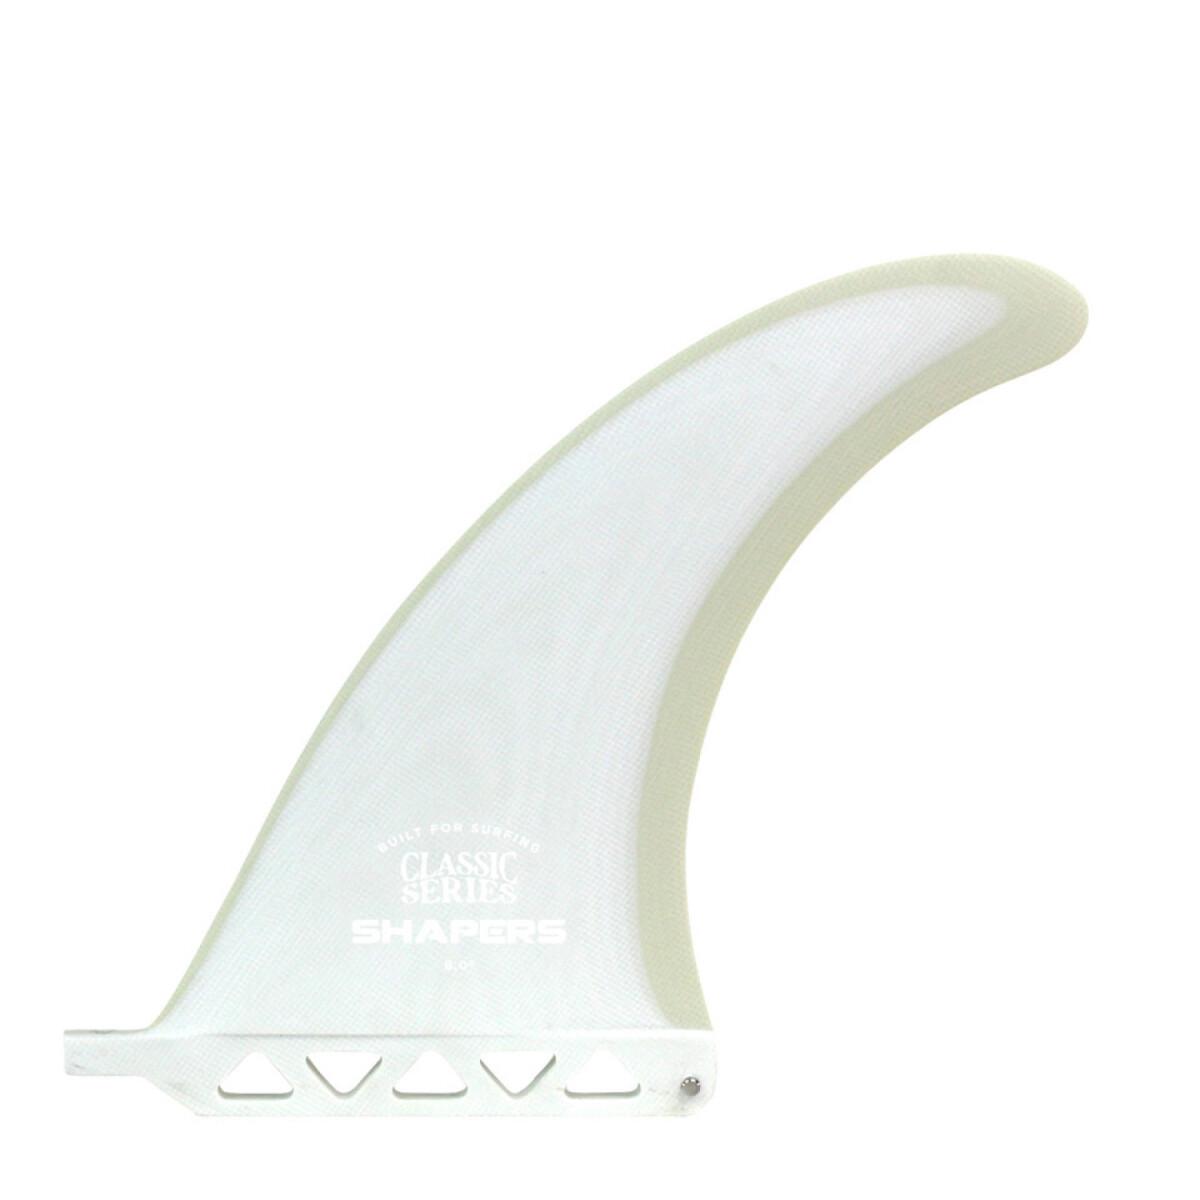 Quilla Shapers Classic Series 8" 